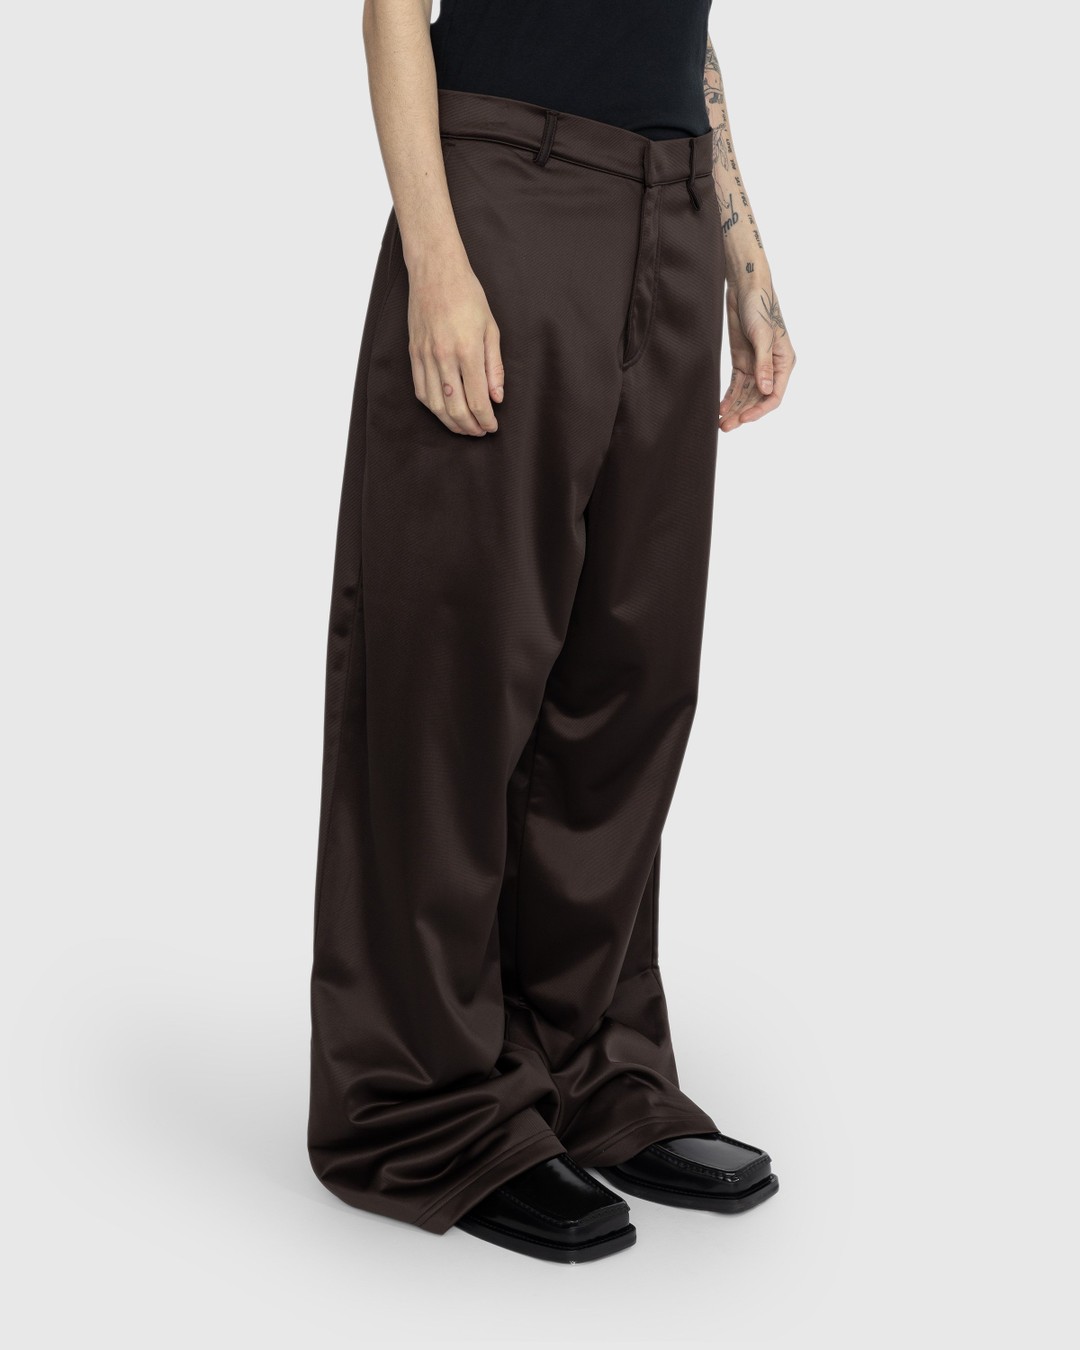 Martine Rose – Oversized Trackpant Brown | Highsnobiety Shop